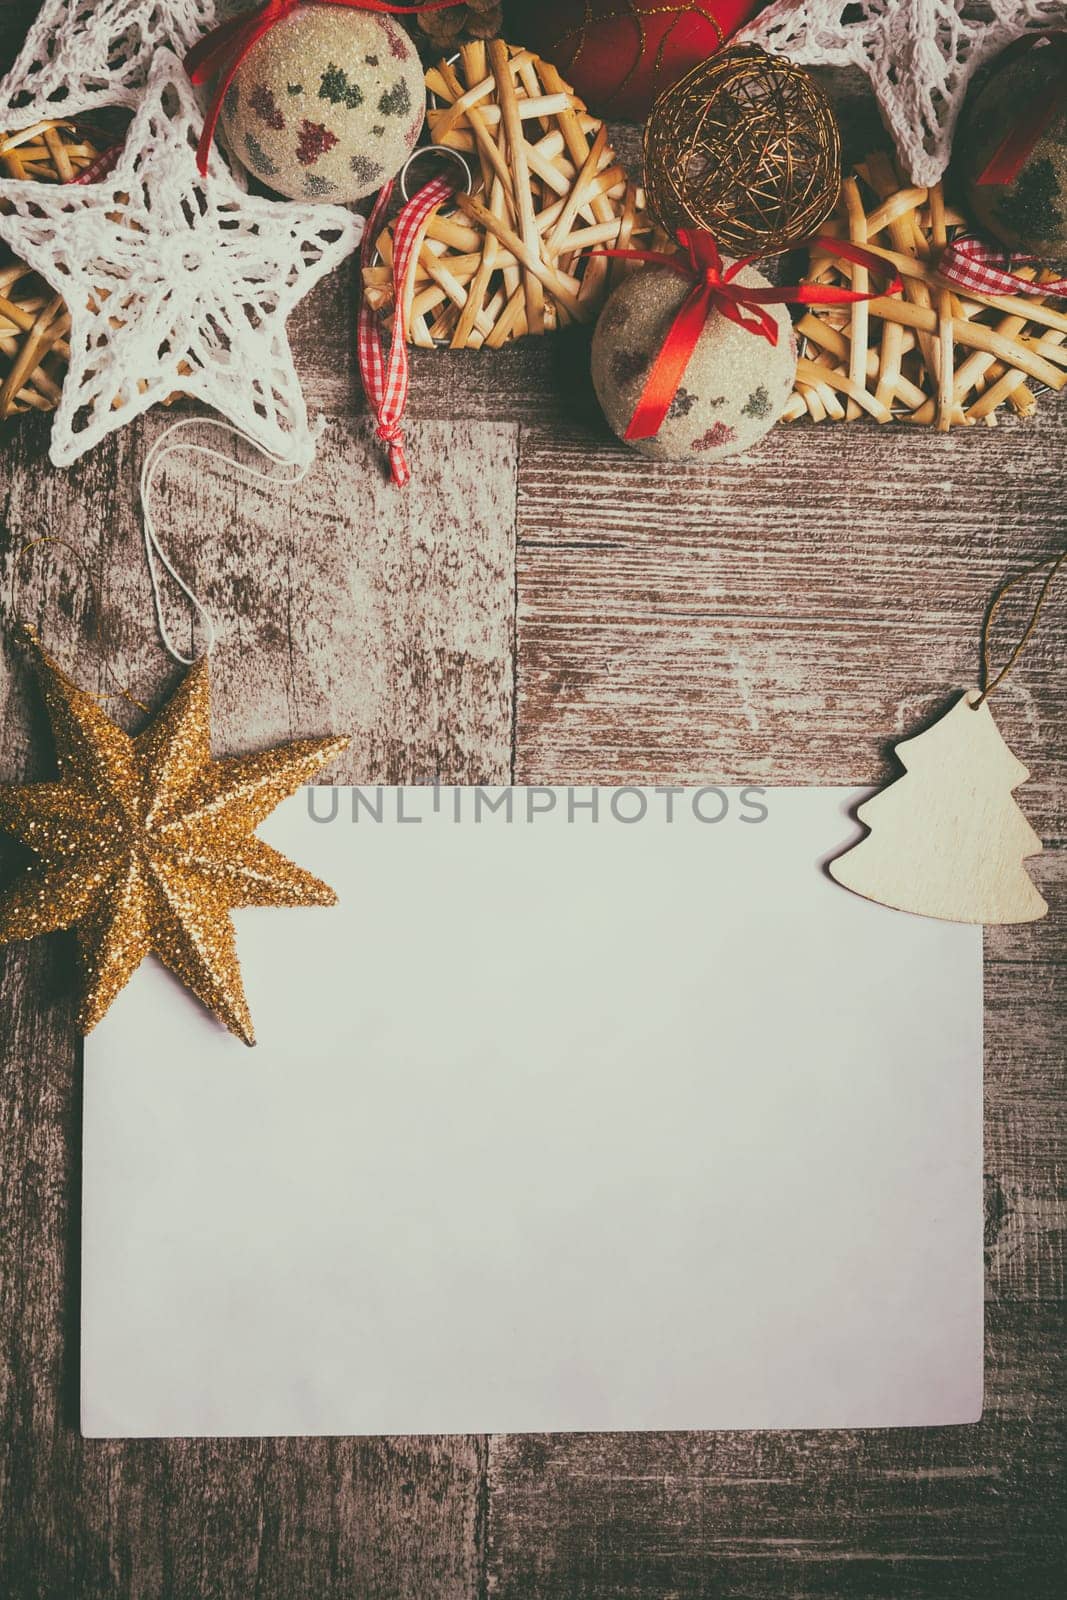 Christmas letter on wooden background with decorations arround. Xmas ornaments